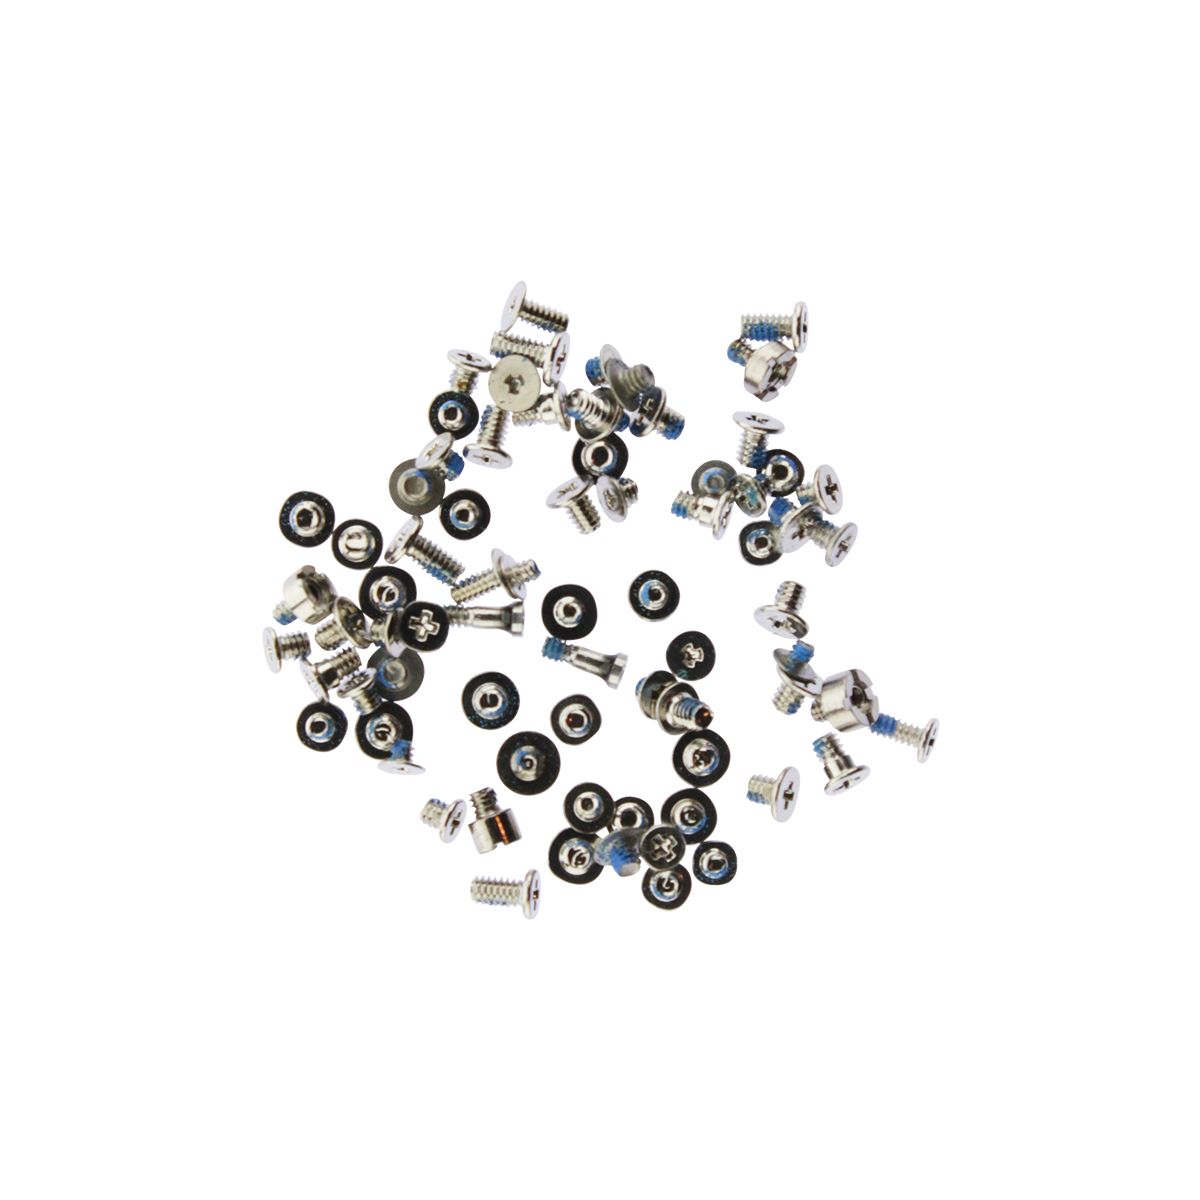 iphone-7-screw-set-silver-1_1_RWUADXKAQECE.png